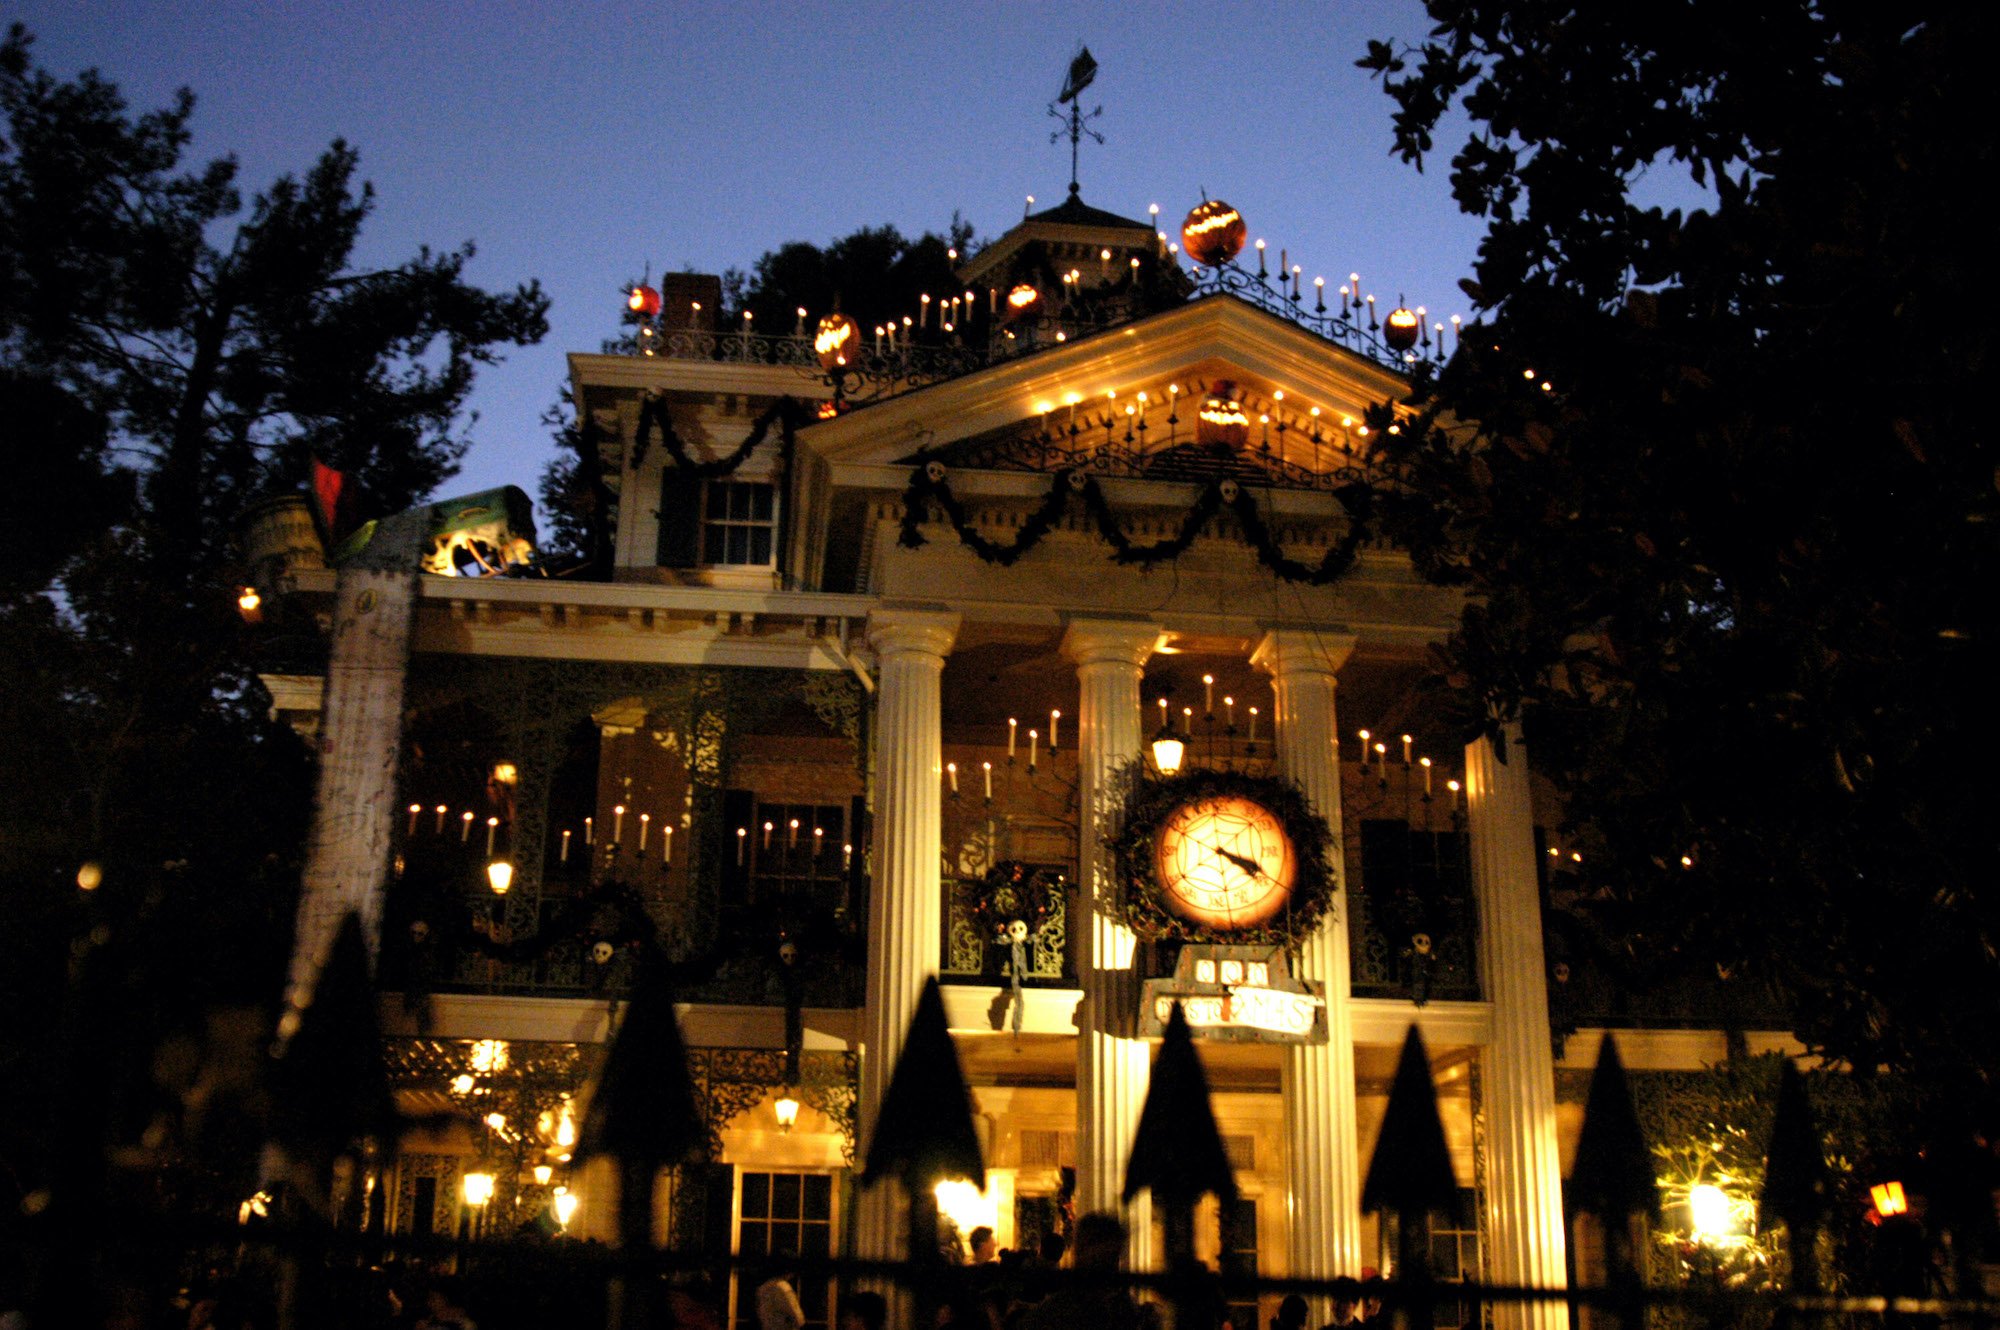 Disneyland's haunted mansion decorated for Christmas